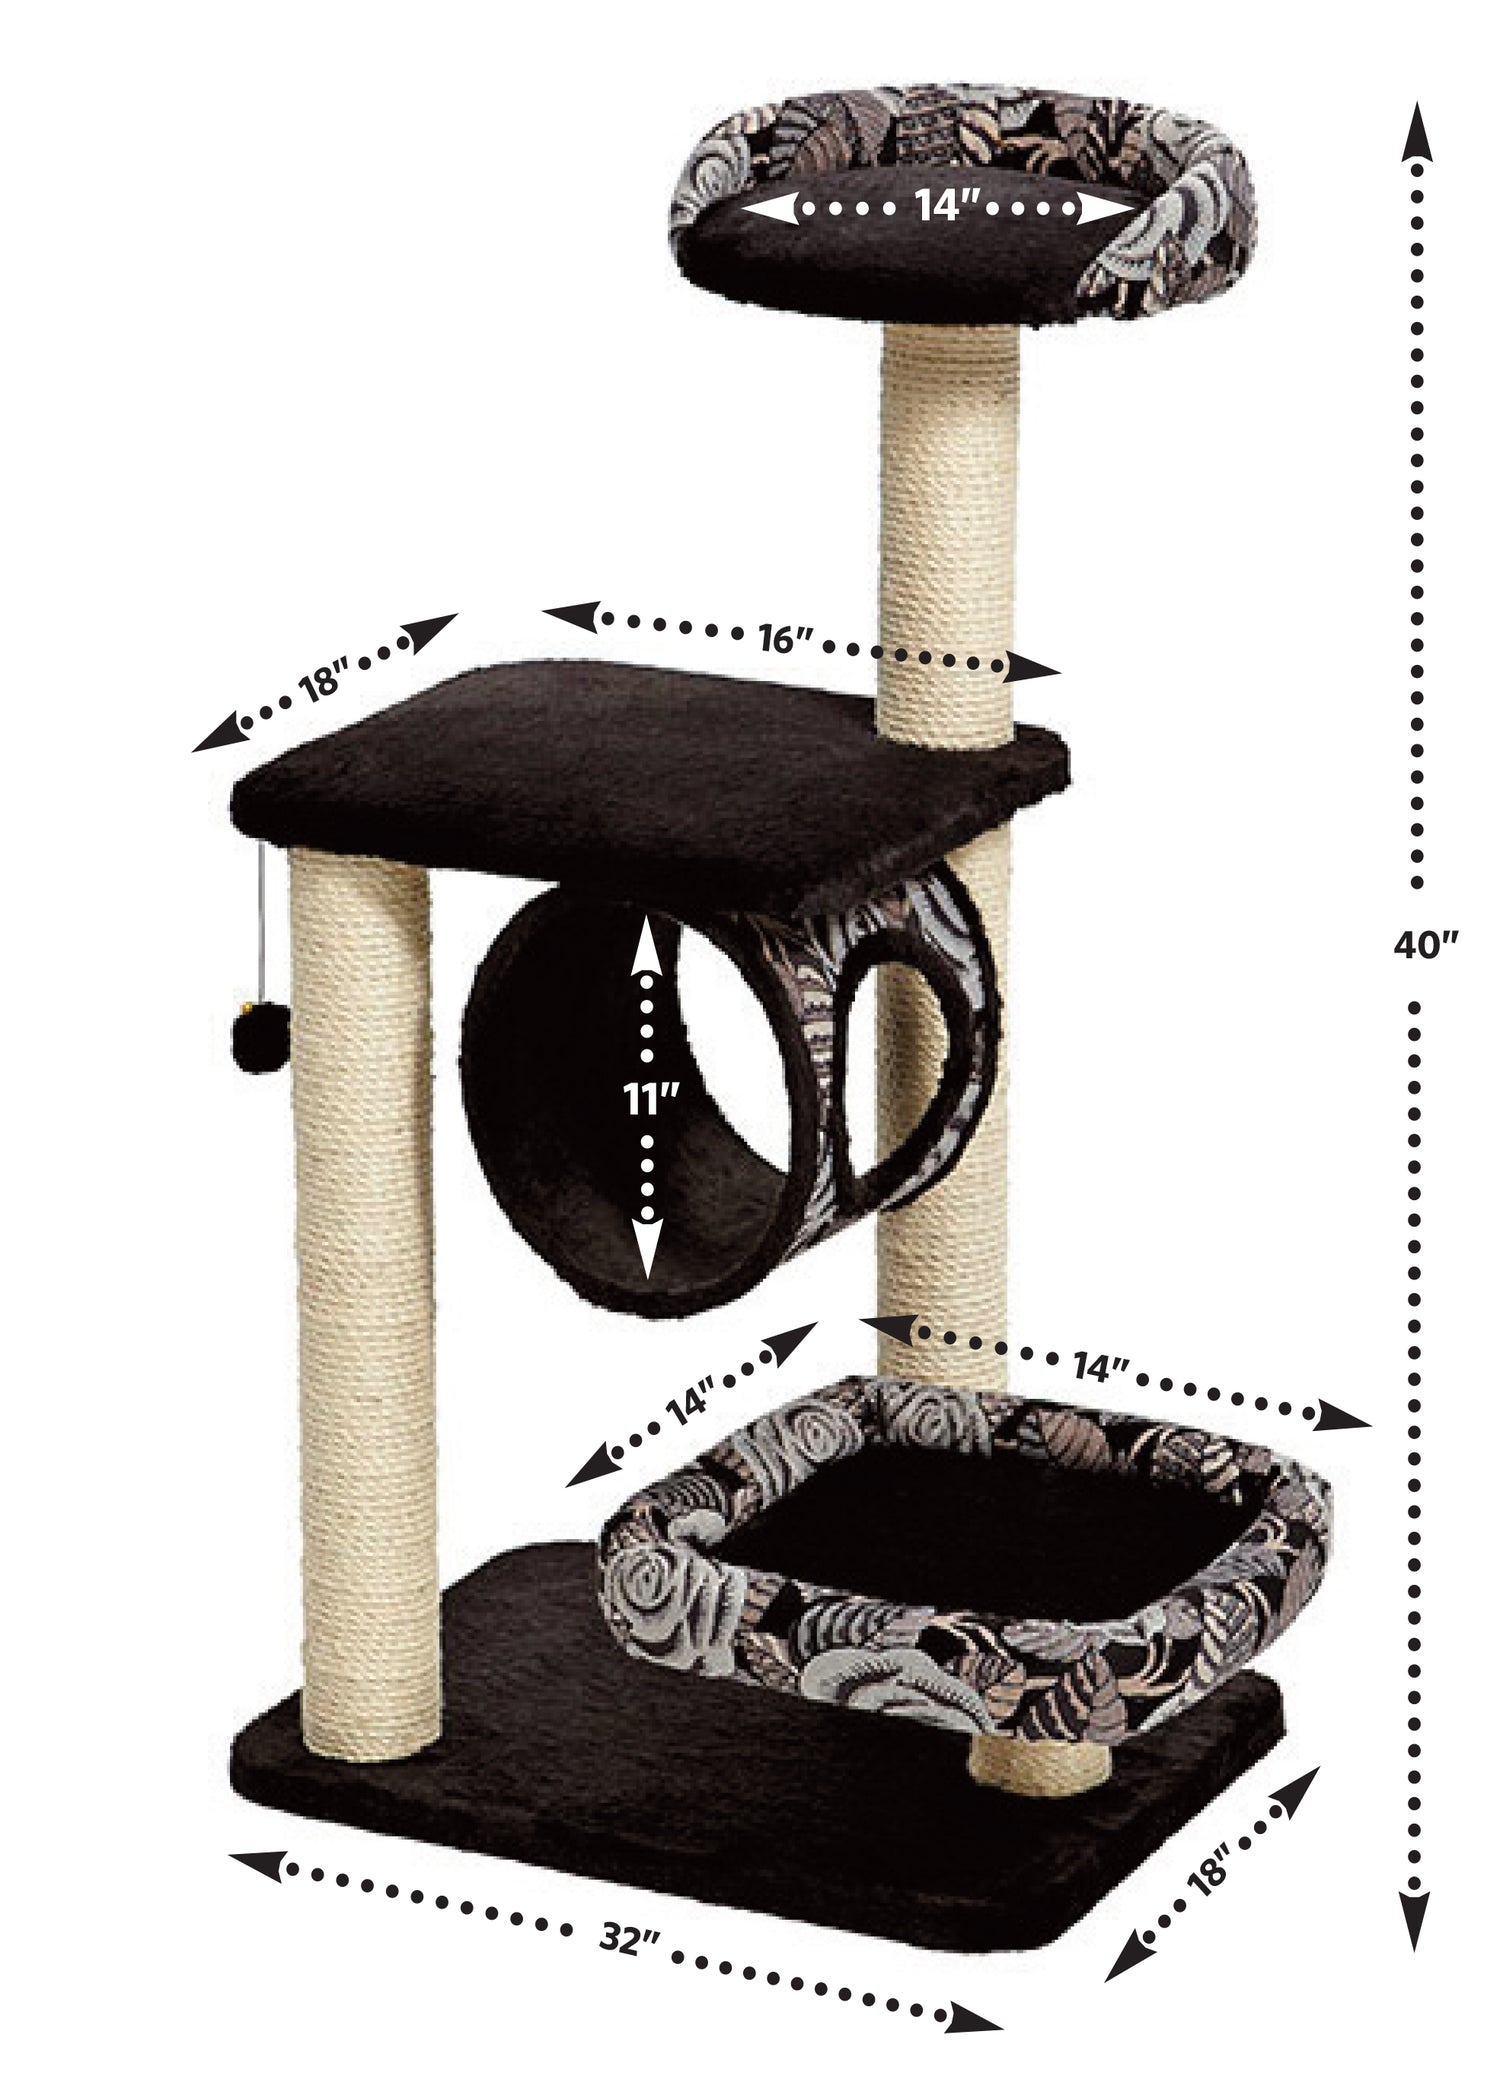 Midwest Cat Furniture in Escapade Style